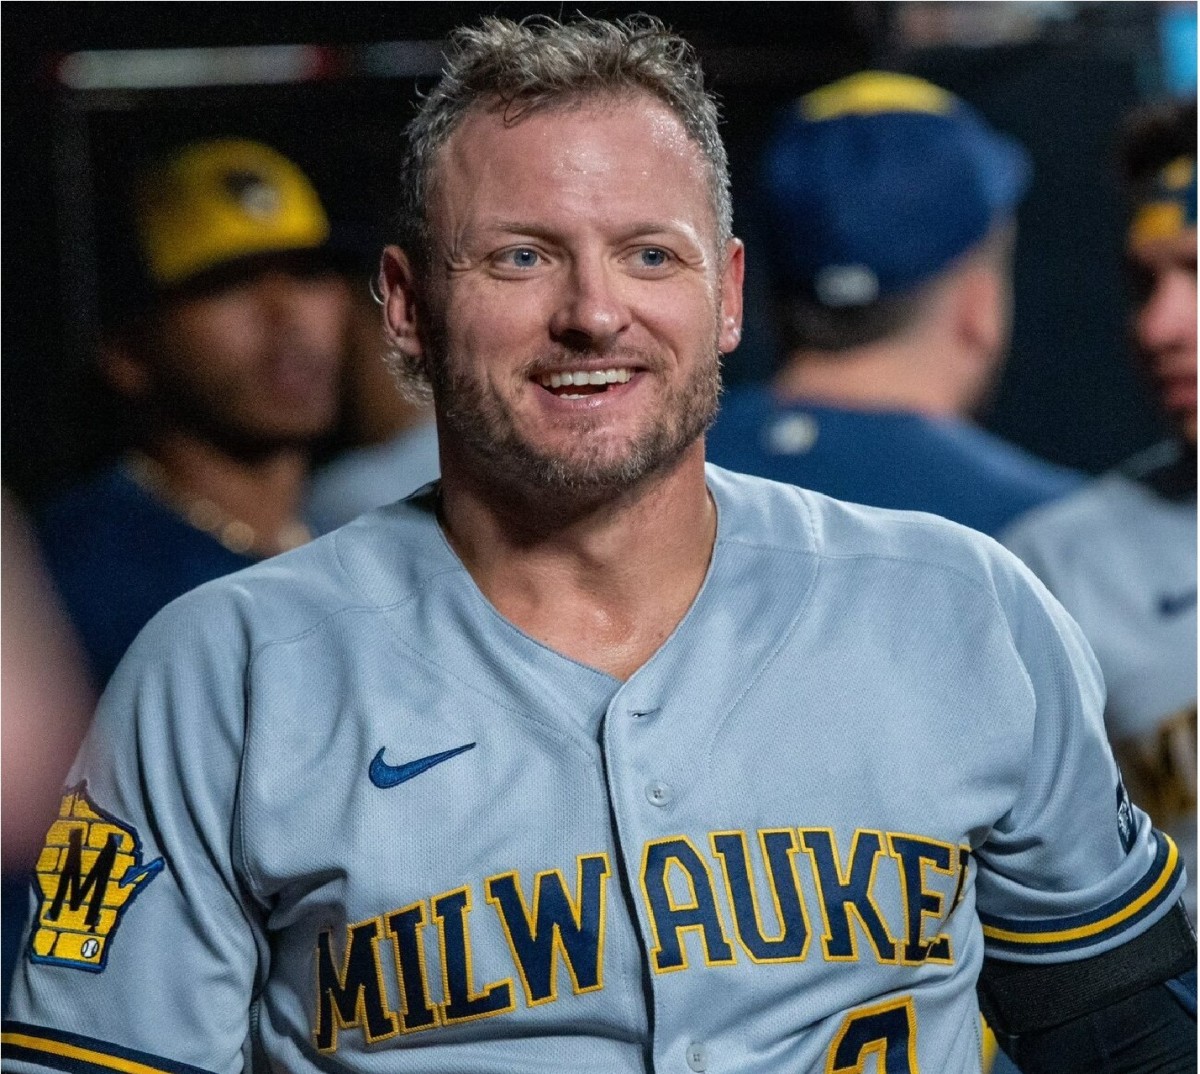 Josh Donaldson had awkward reunion with Brewers teammate after